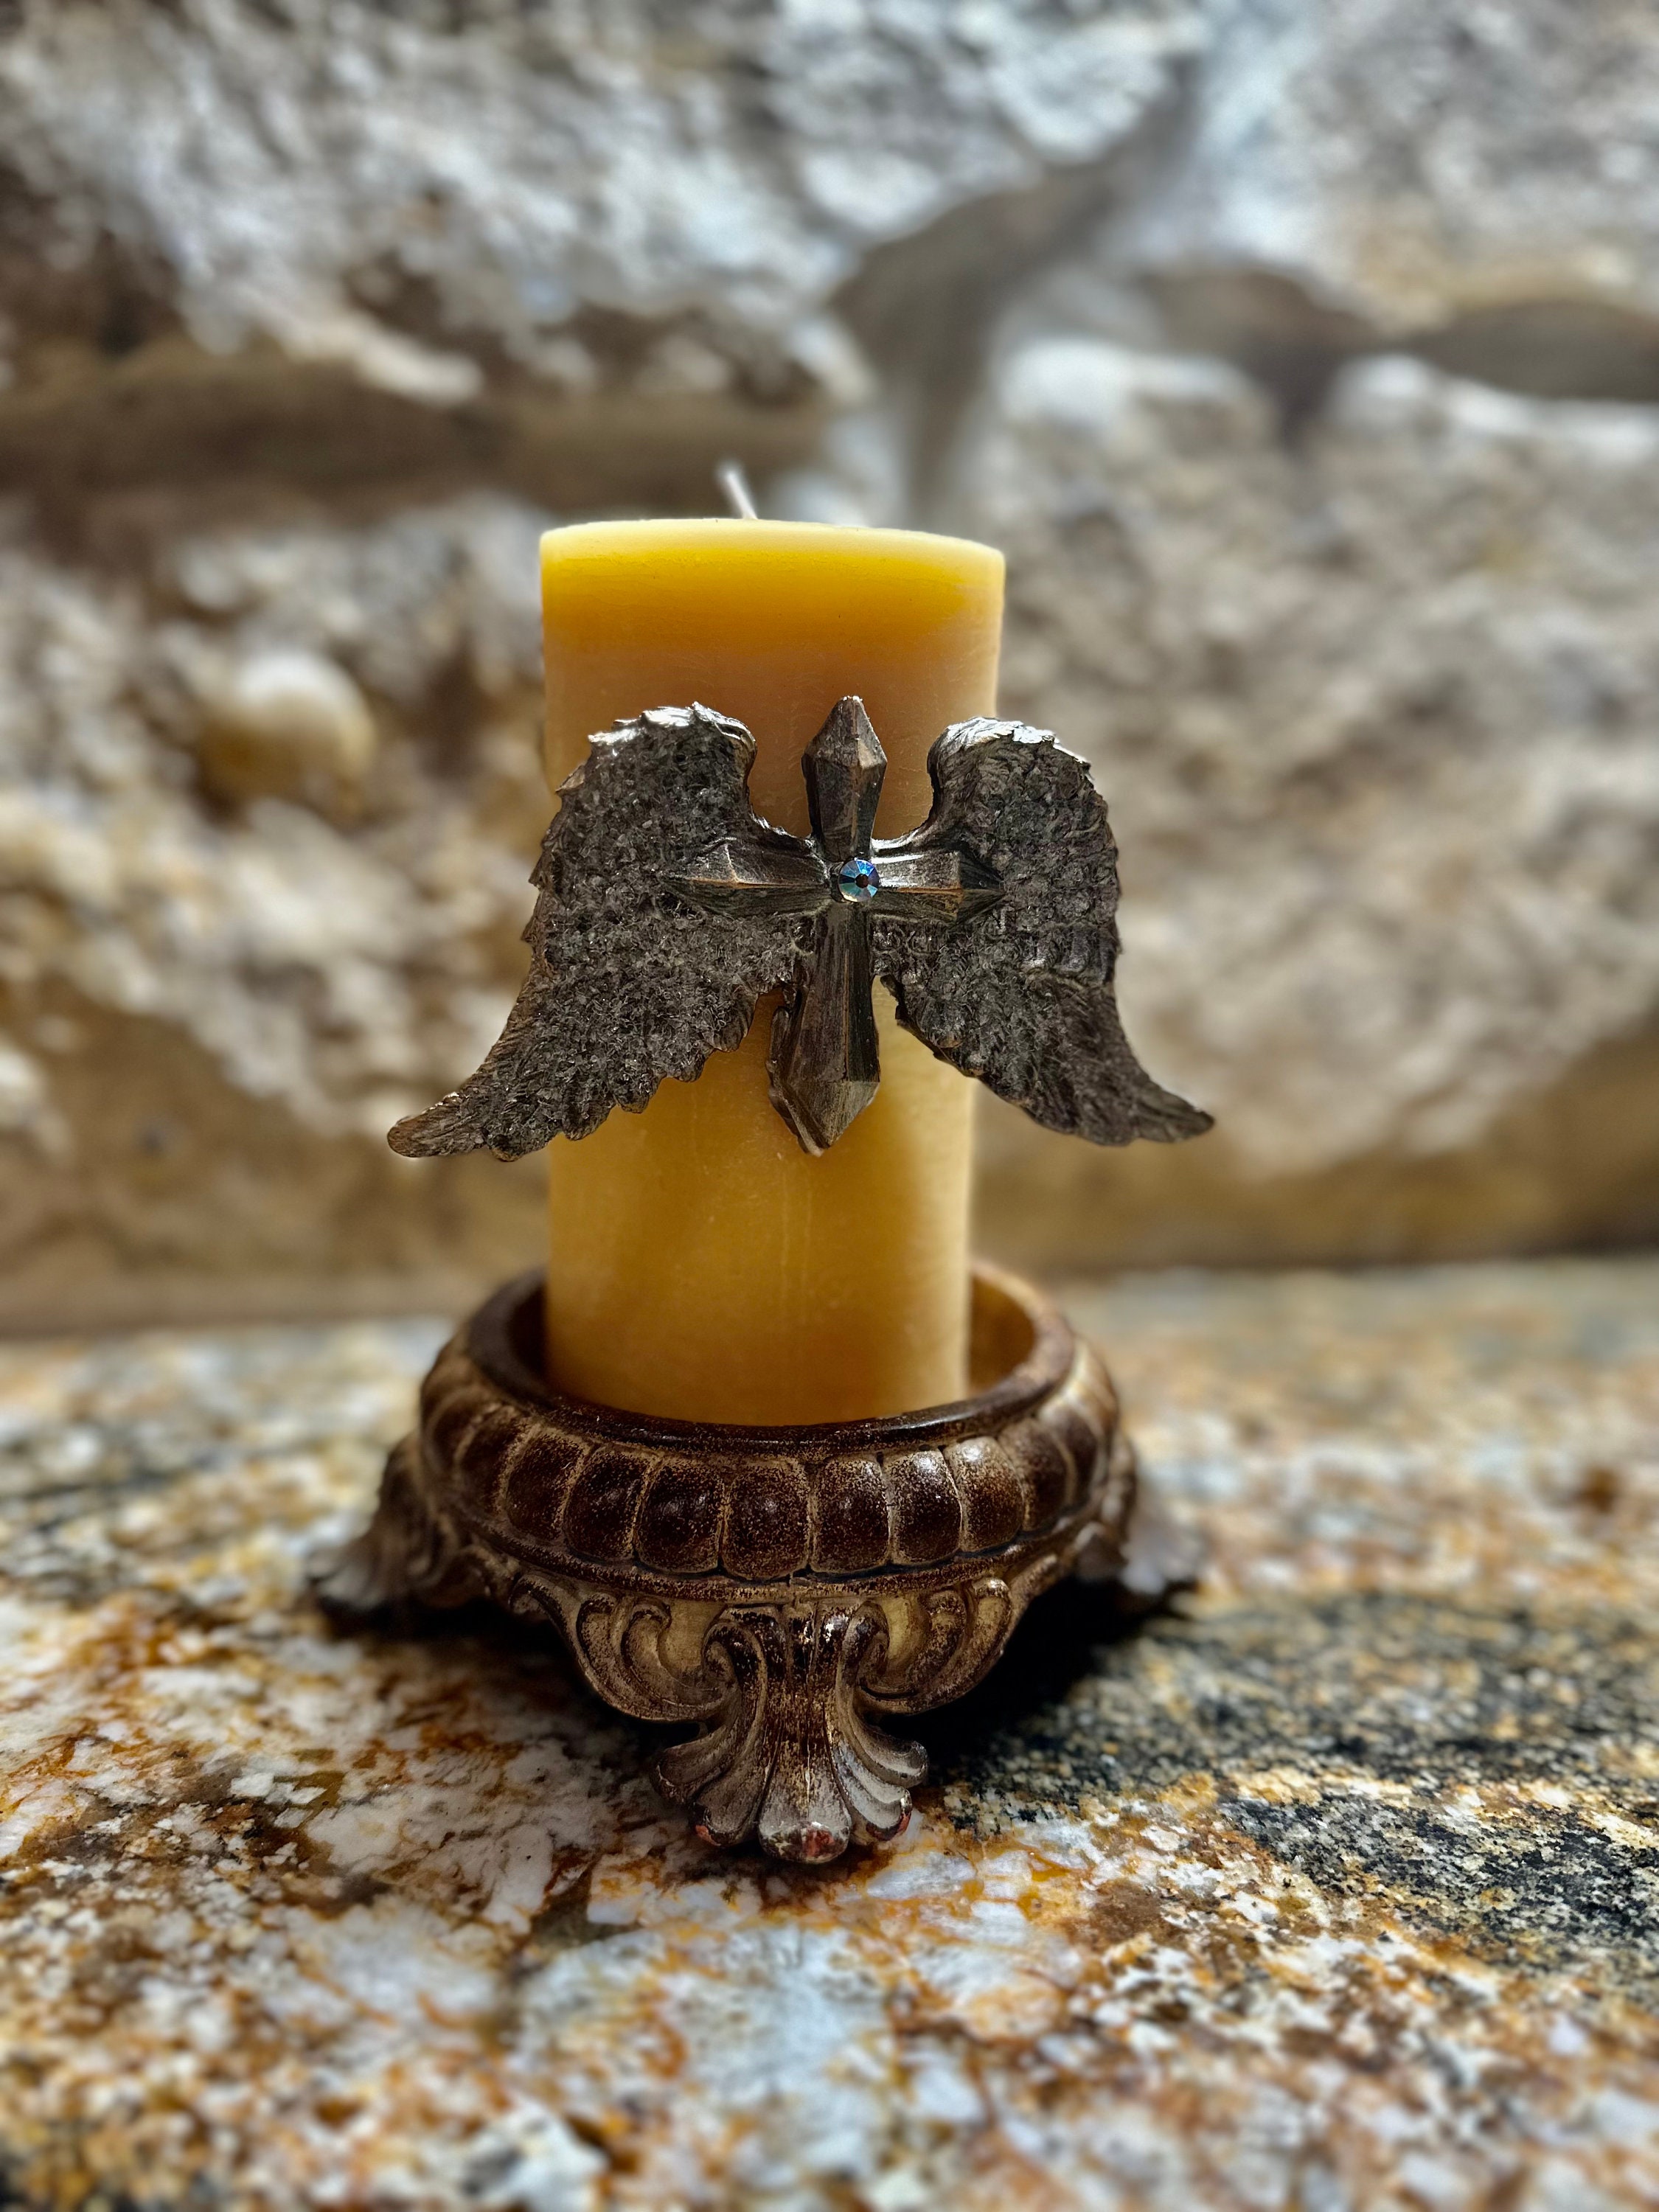 Angel Candle Refill